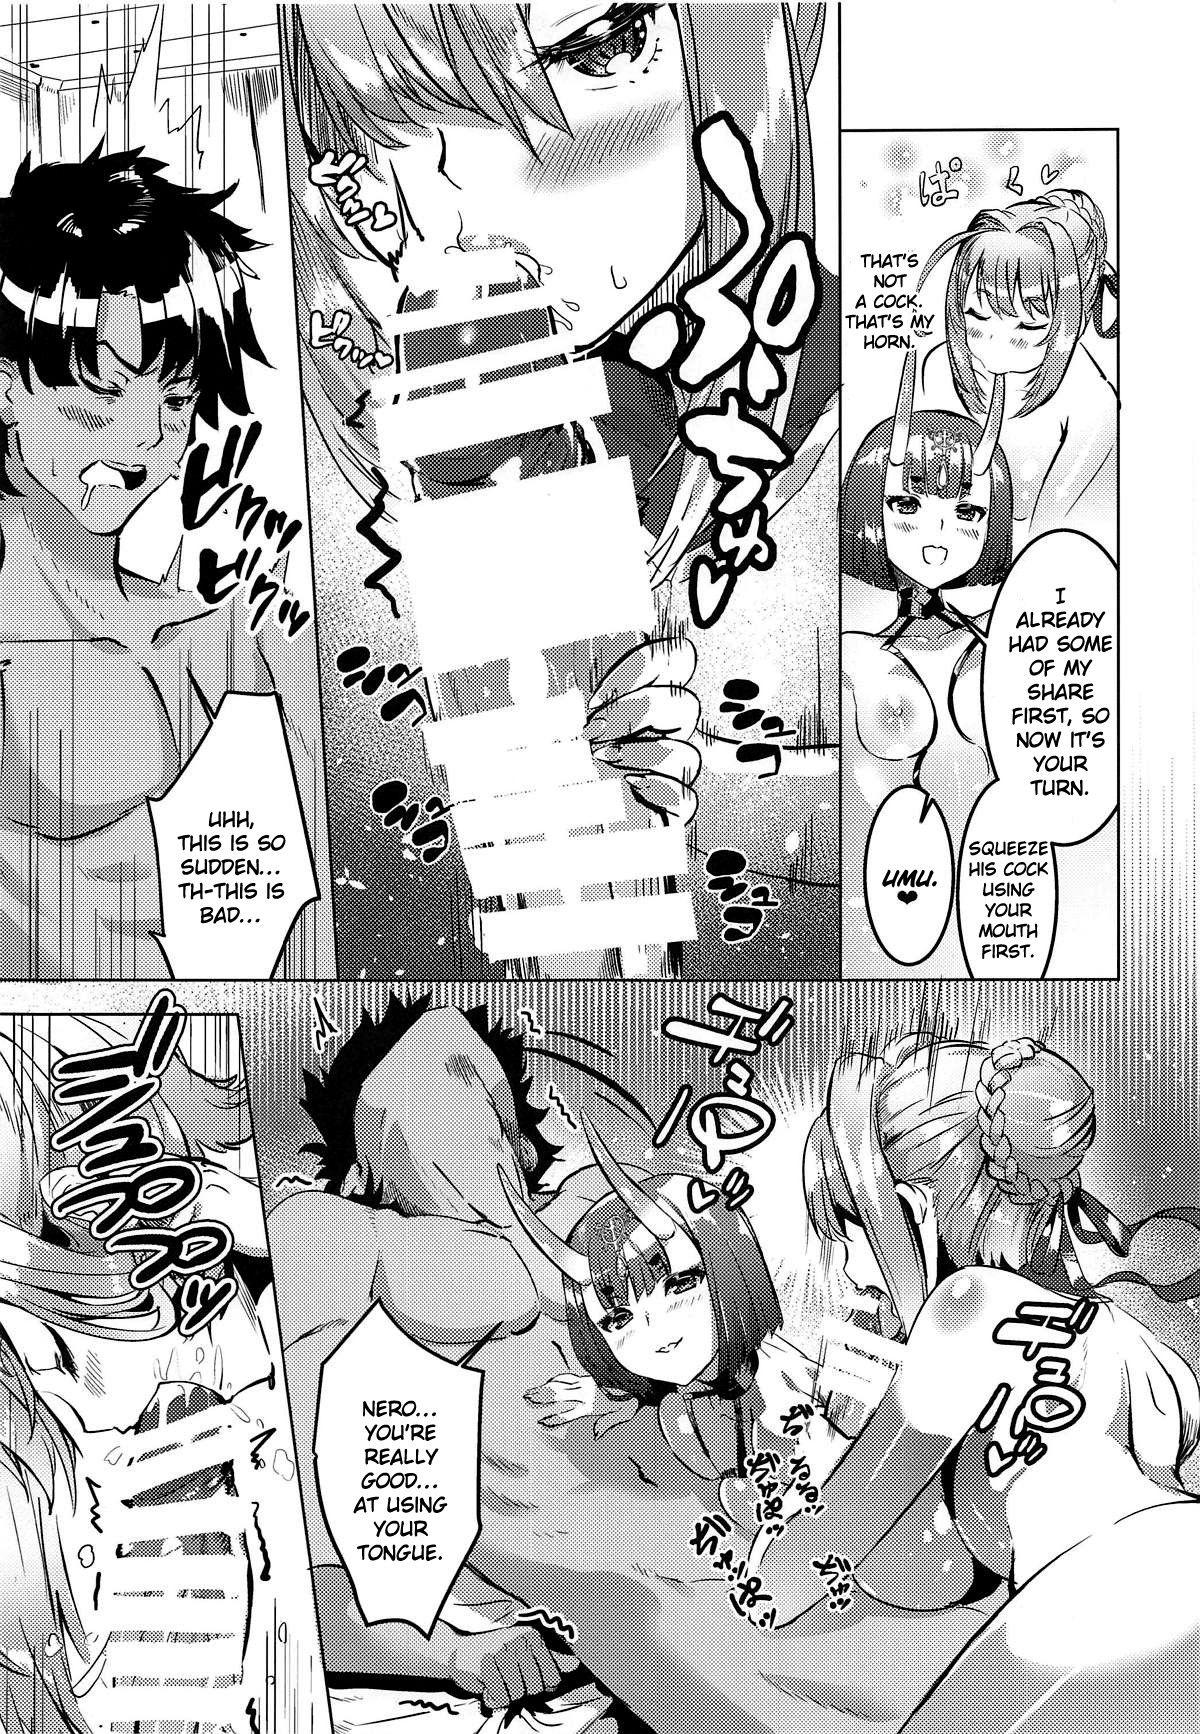 Hd Porn Koutei to Oni no Erohon | An Ero Book About an Emperor and an Oni - Fate grand order Romance - Page 6